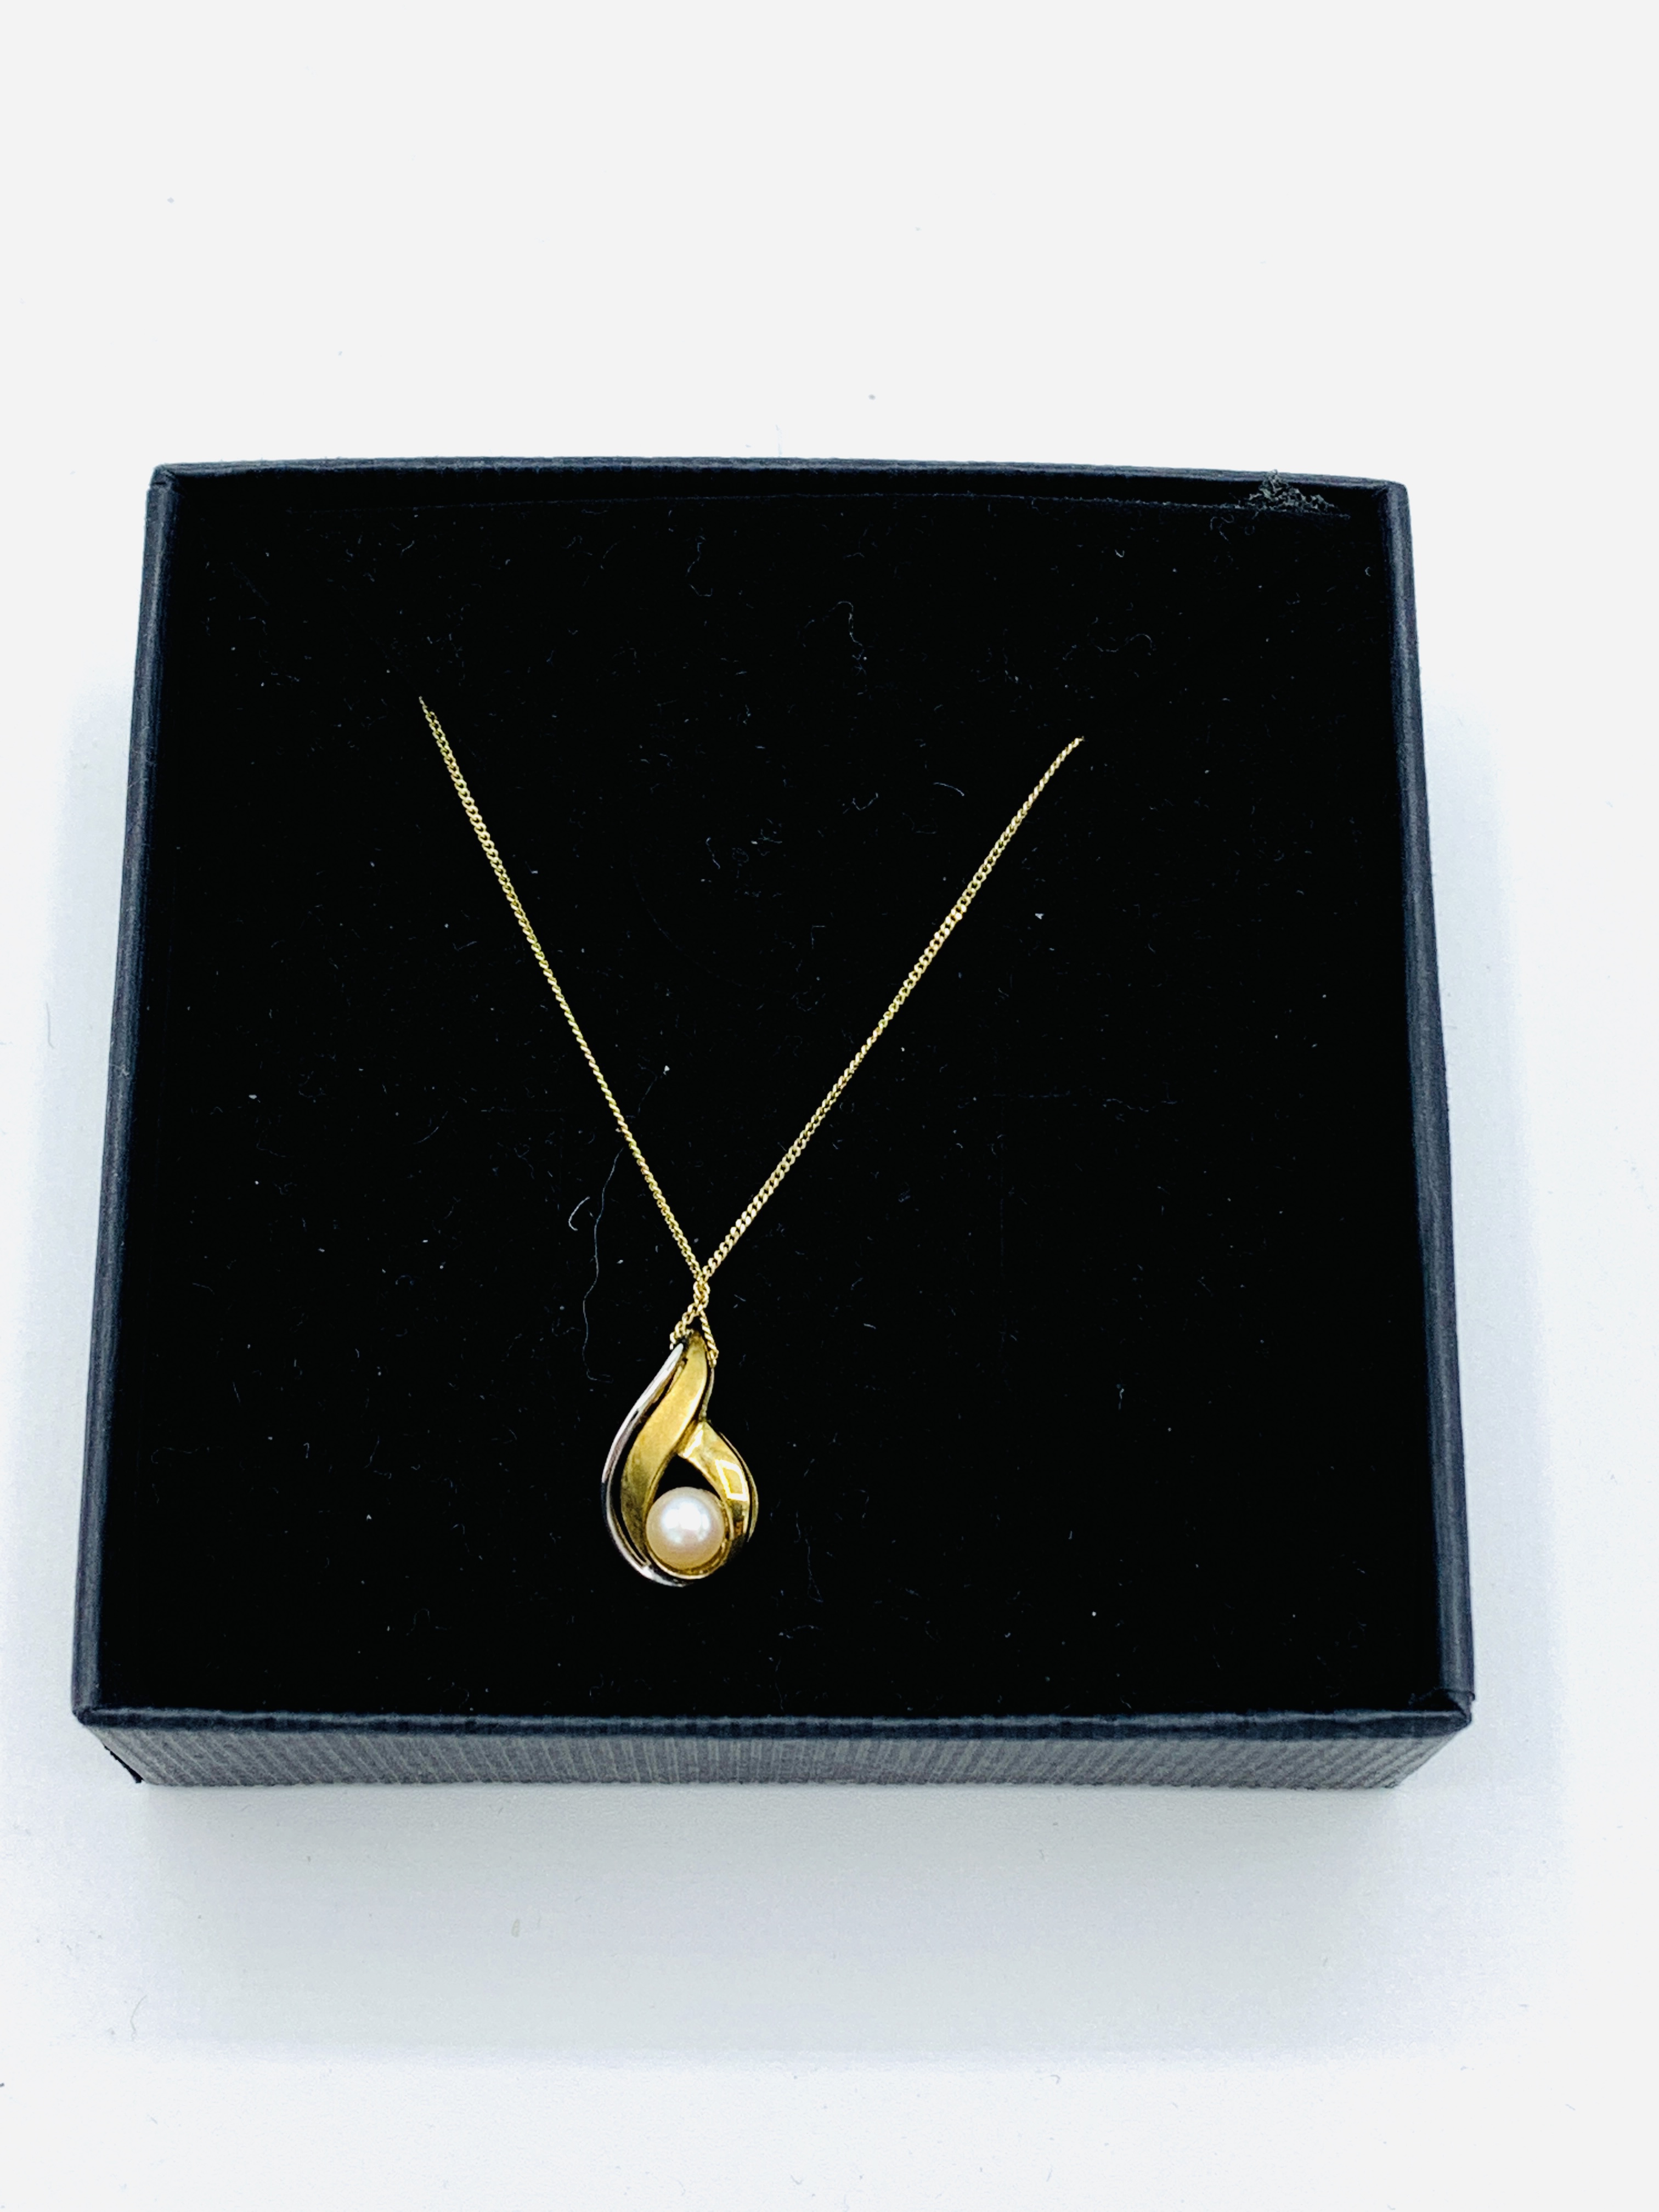 9ct gold and pearl pendant on a 9ct gold chain